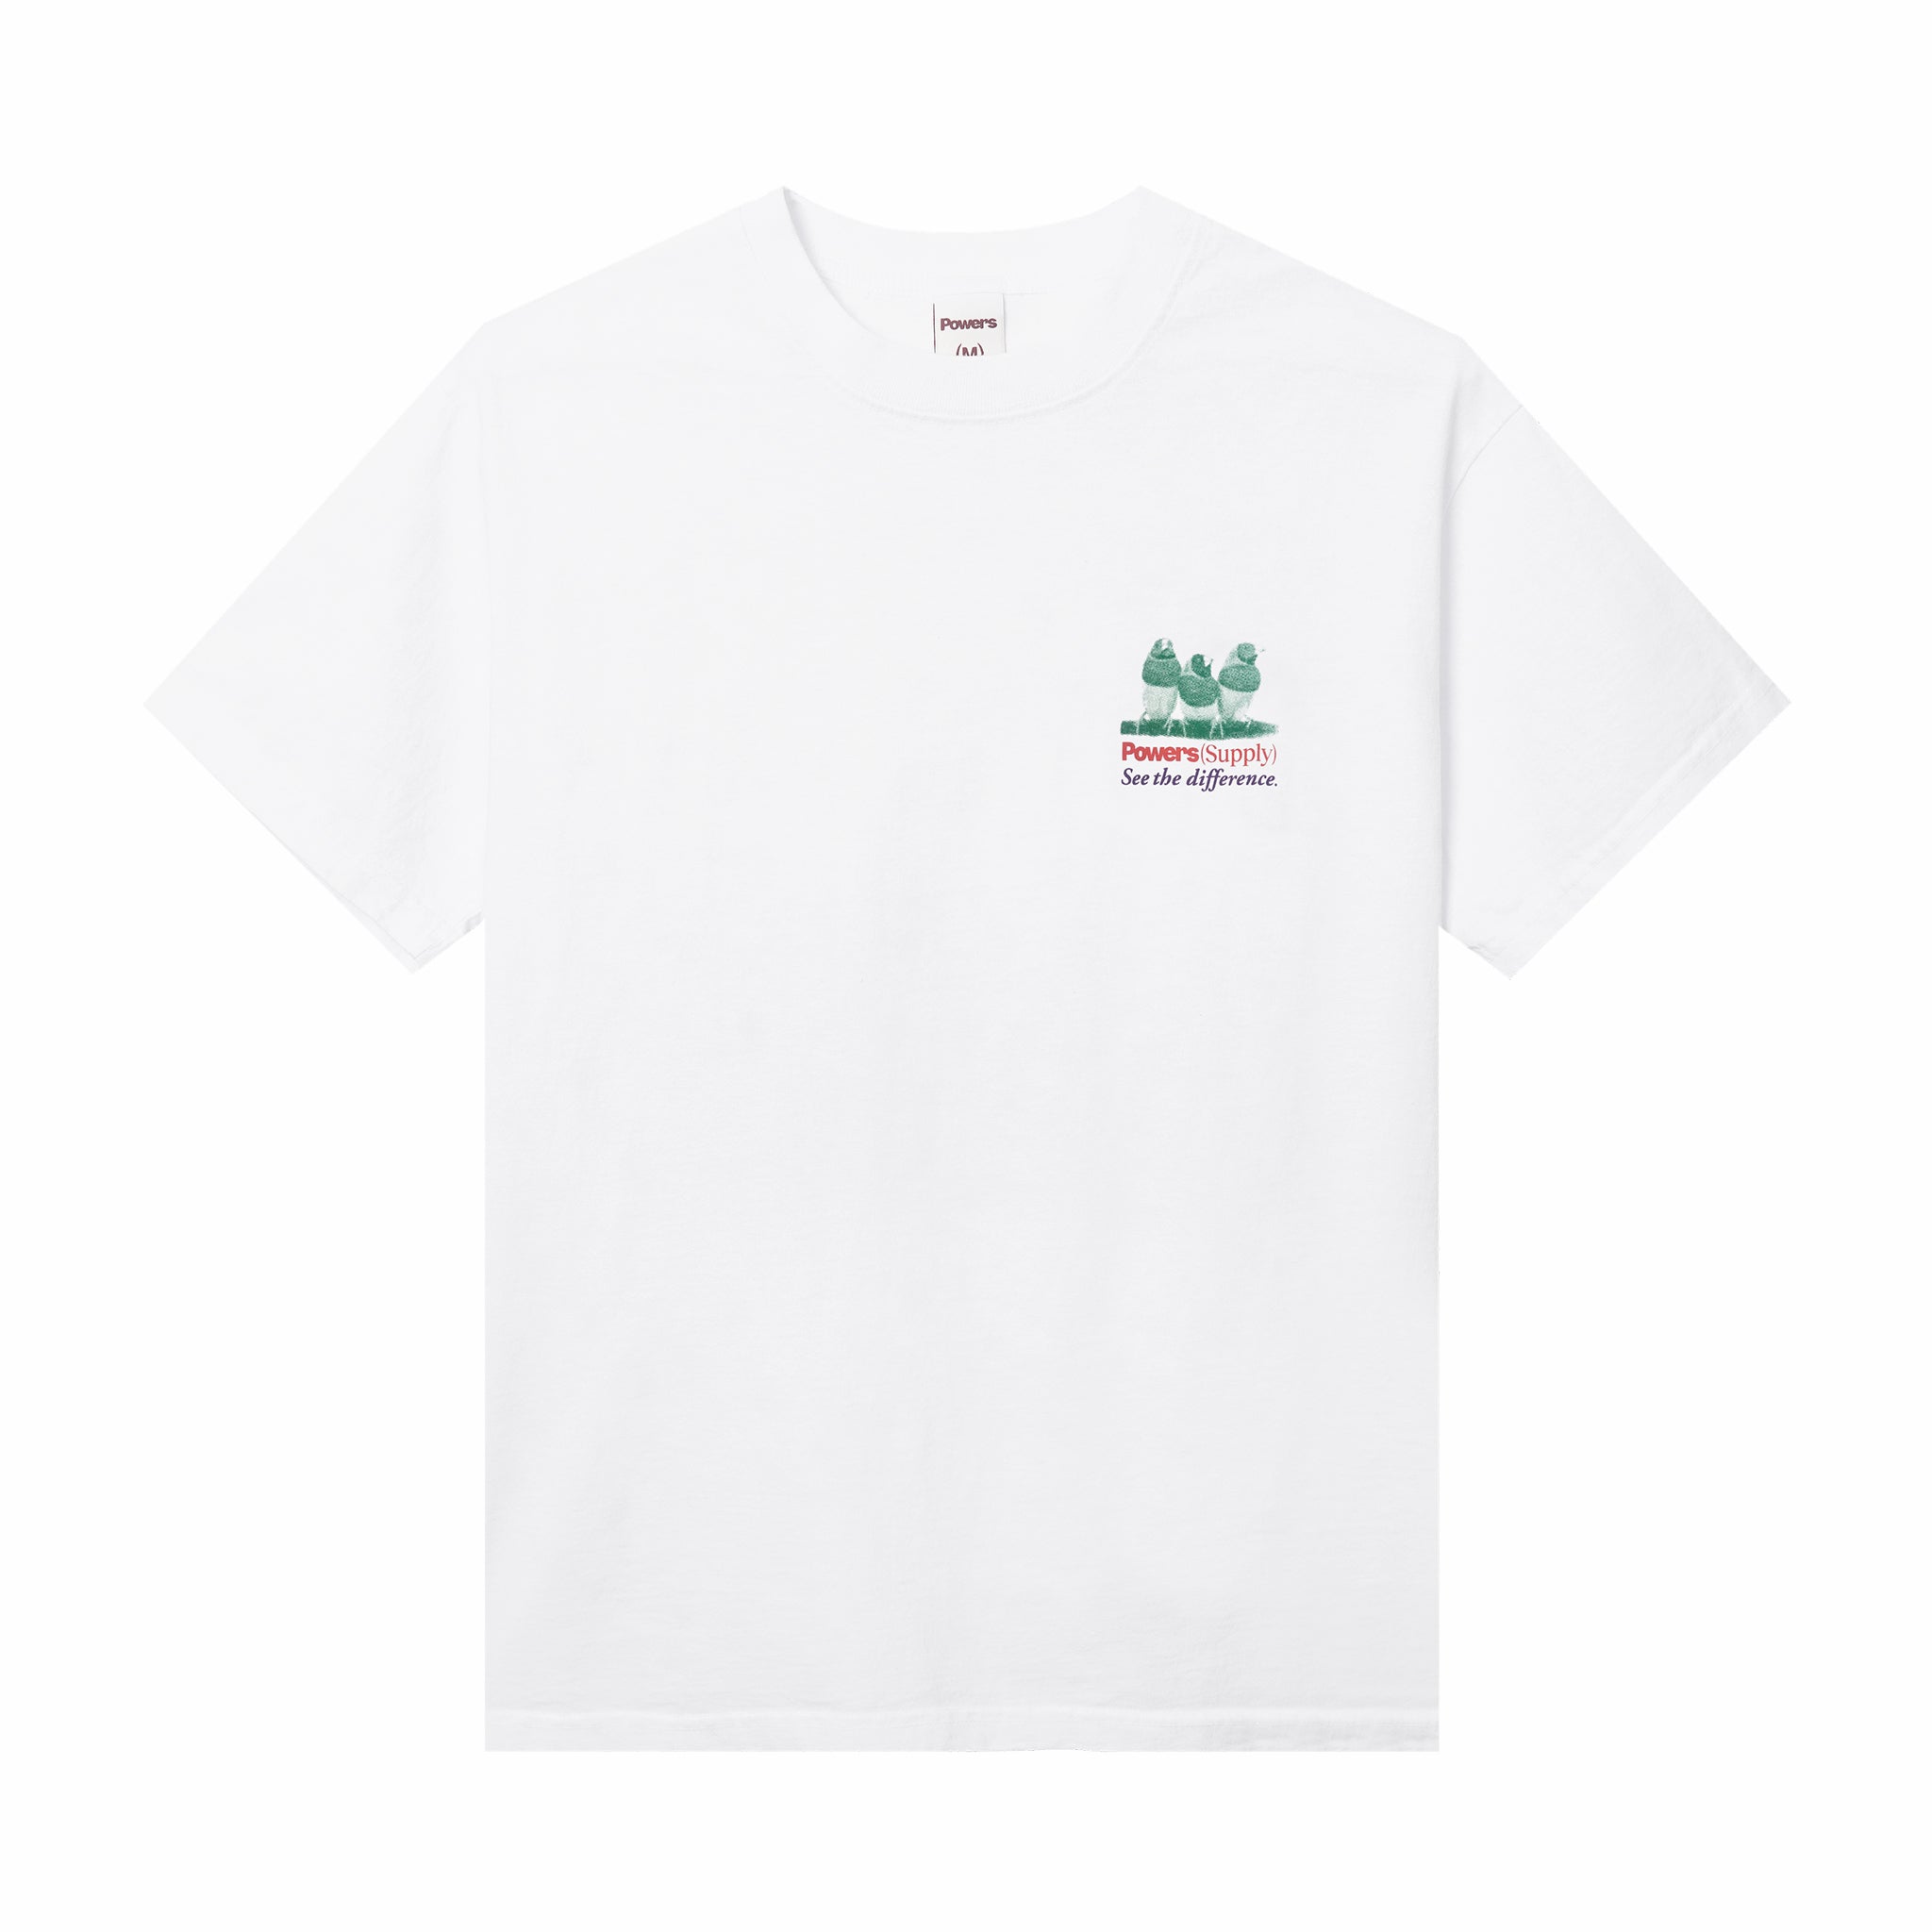 Powers Supply Birds Tee (White) - August Shop